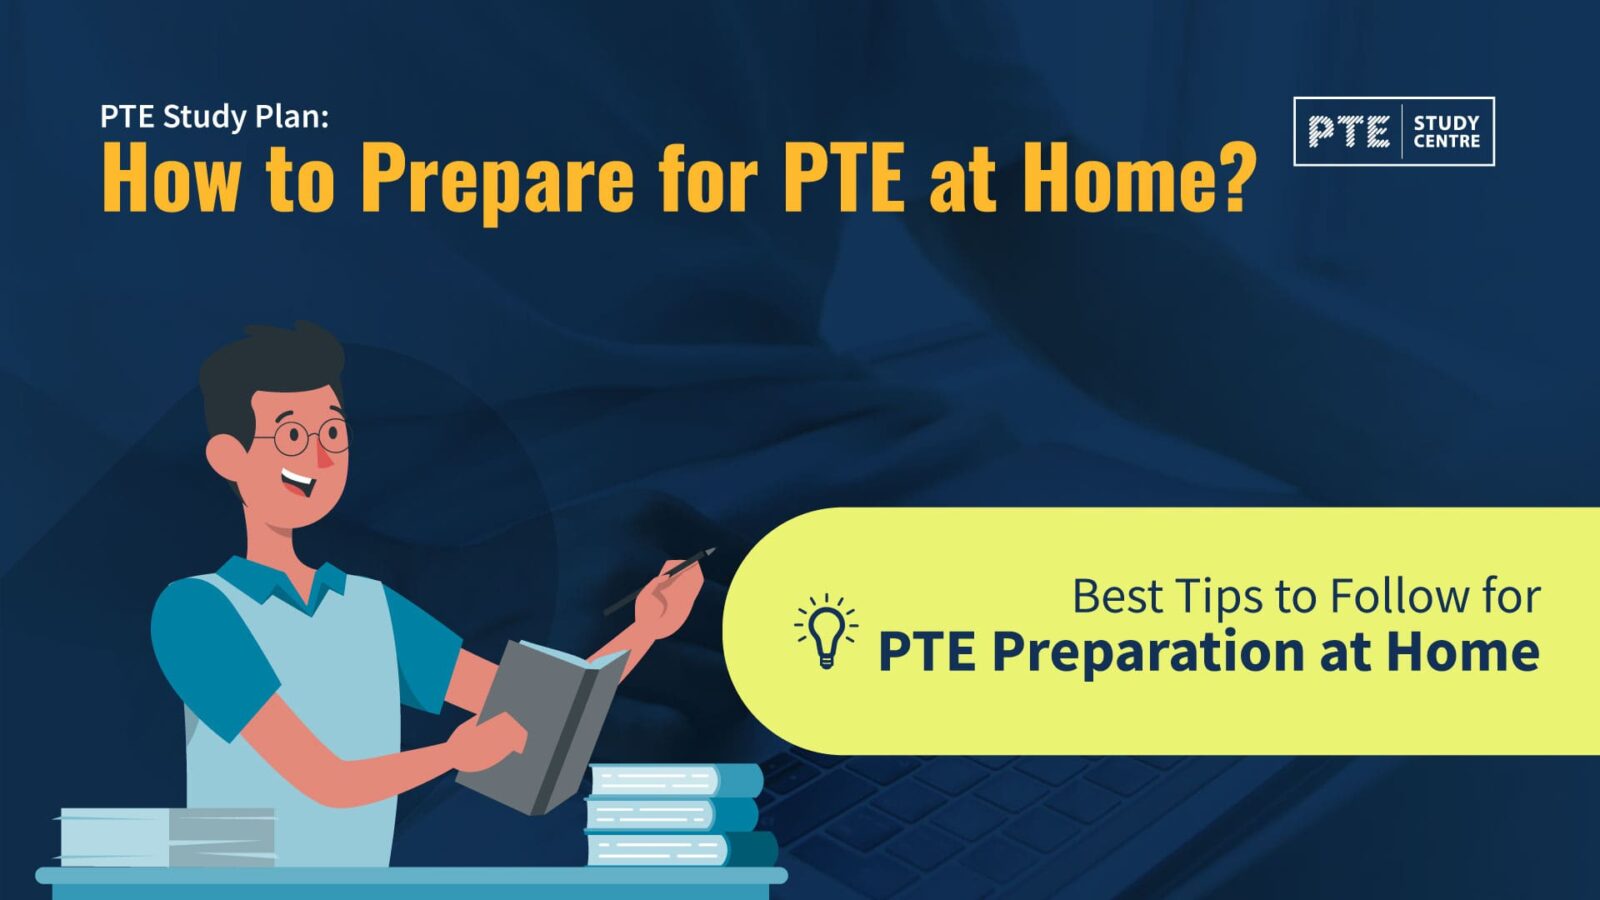 PTE Study Plan: How to Prepare for PTE at Home?